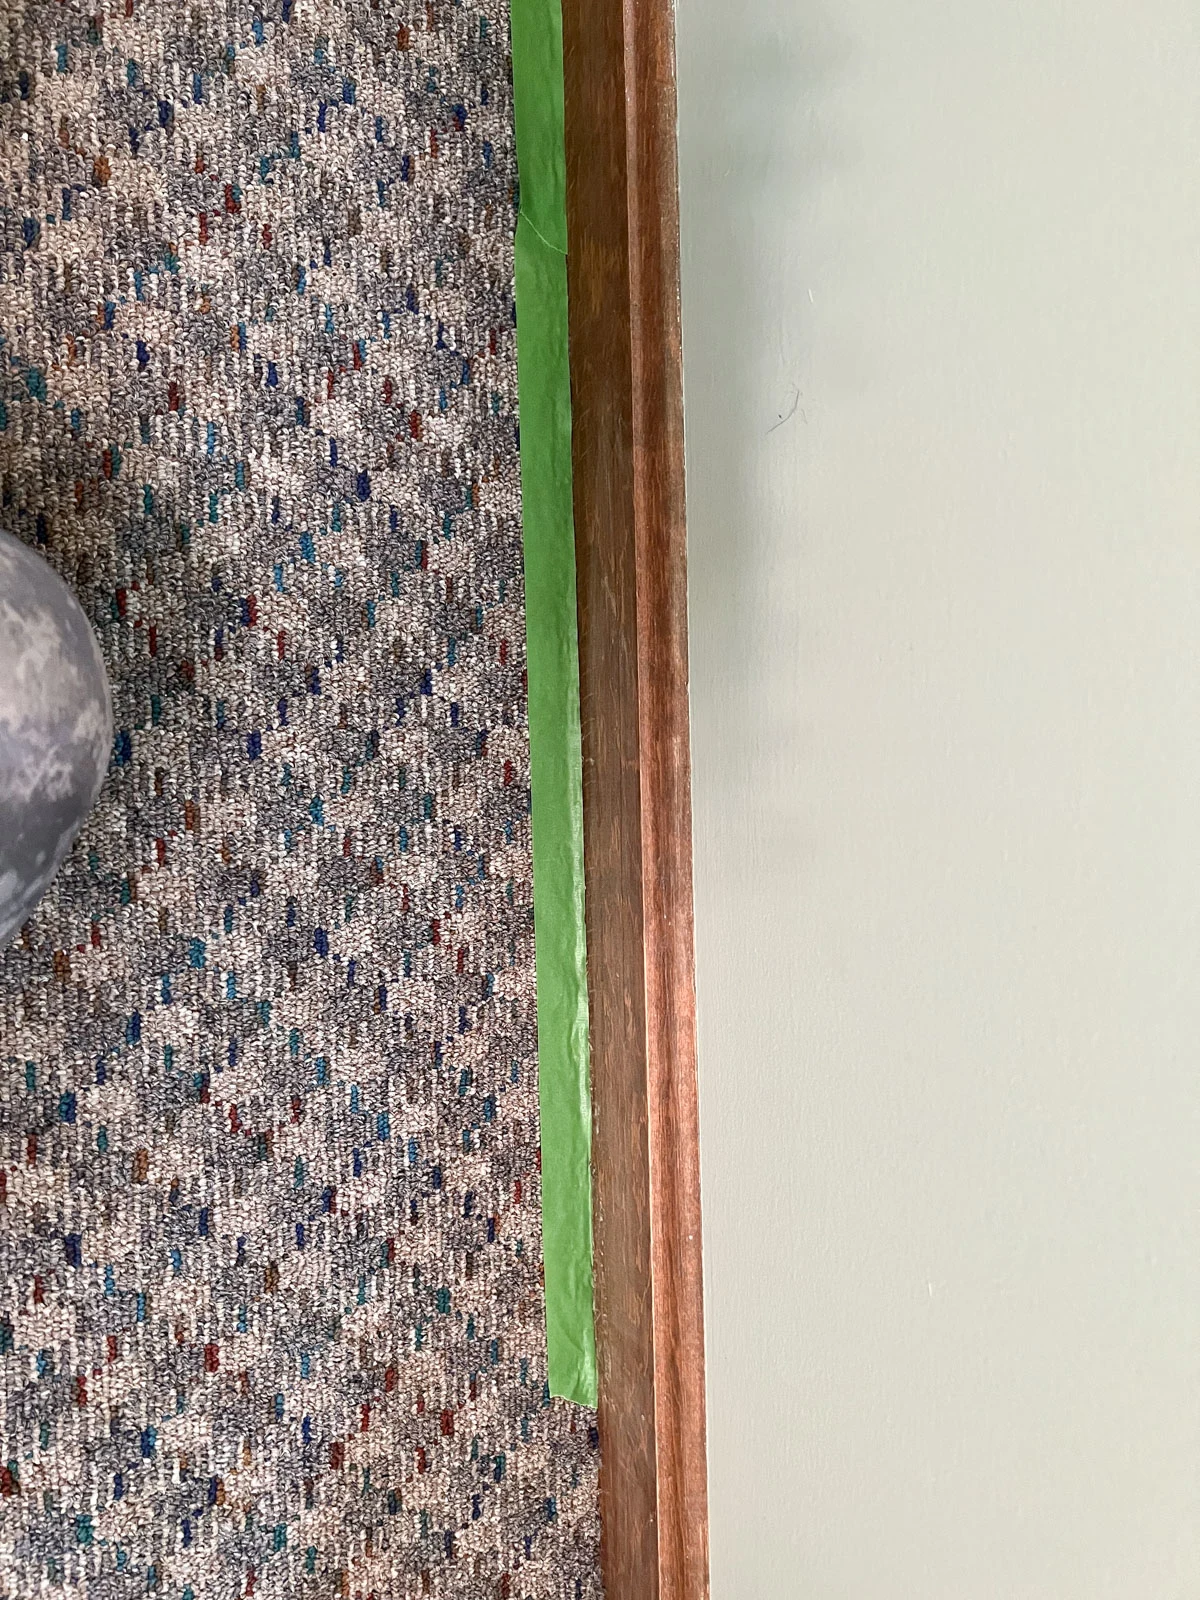 green painter's tape on carpet under wood baseboards.